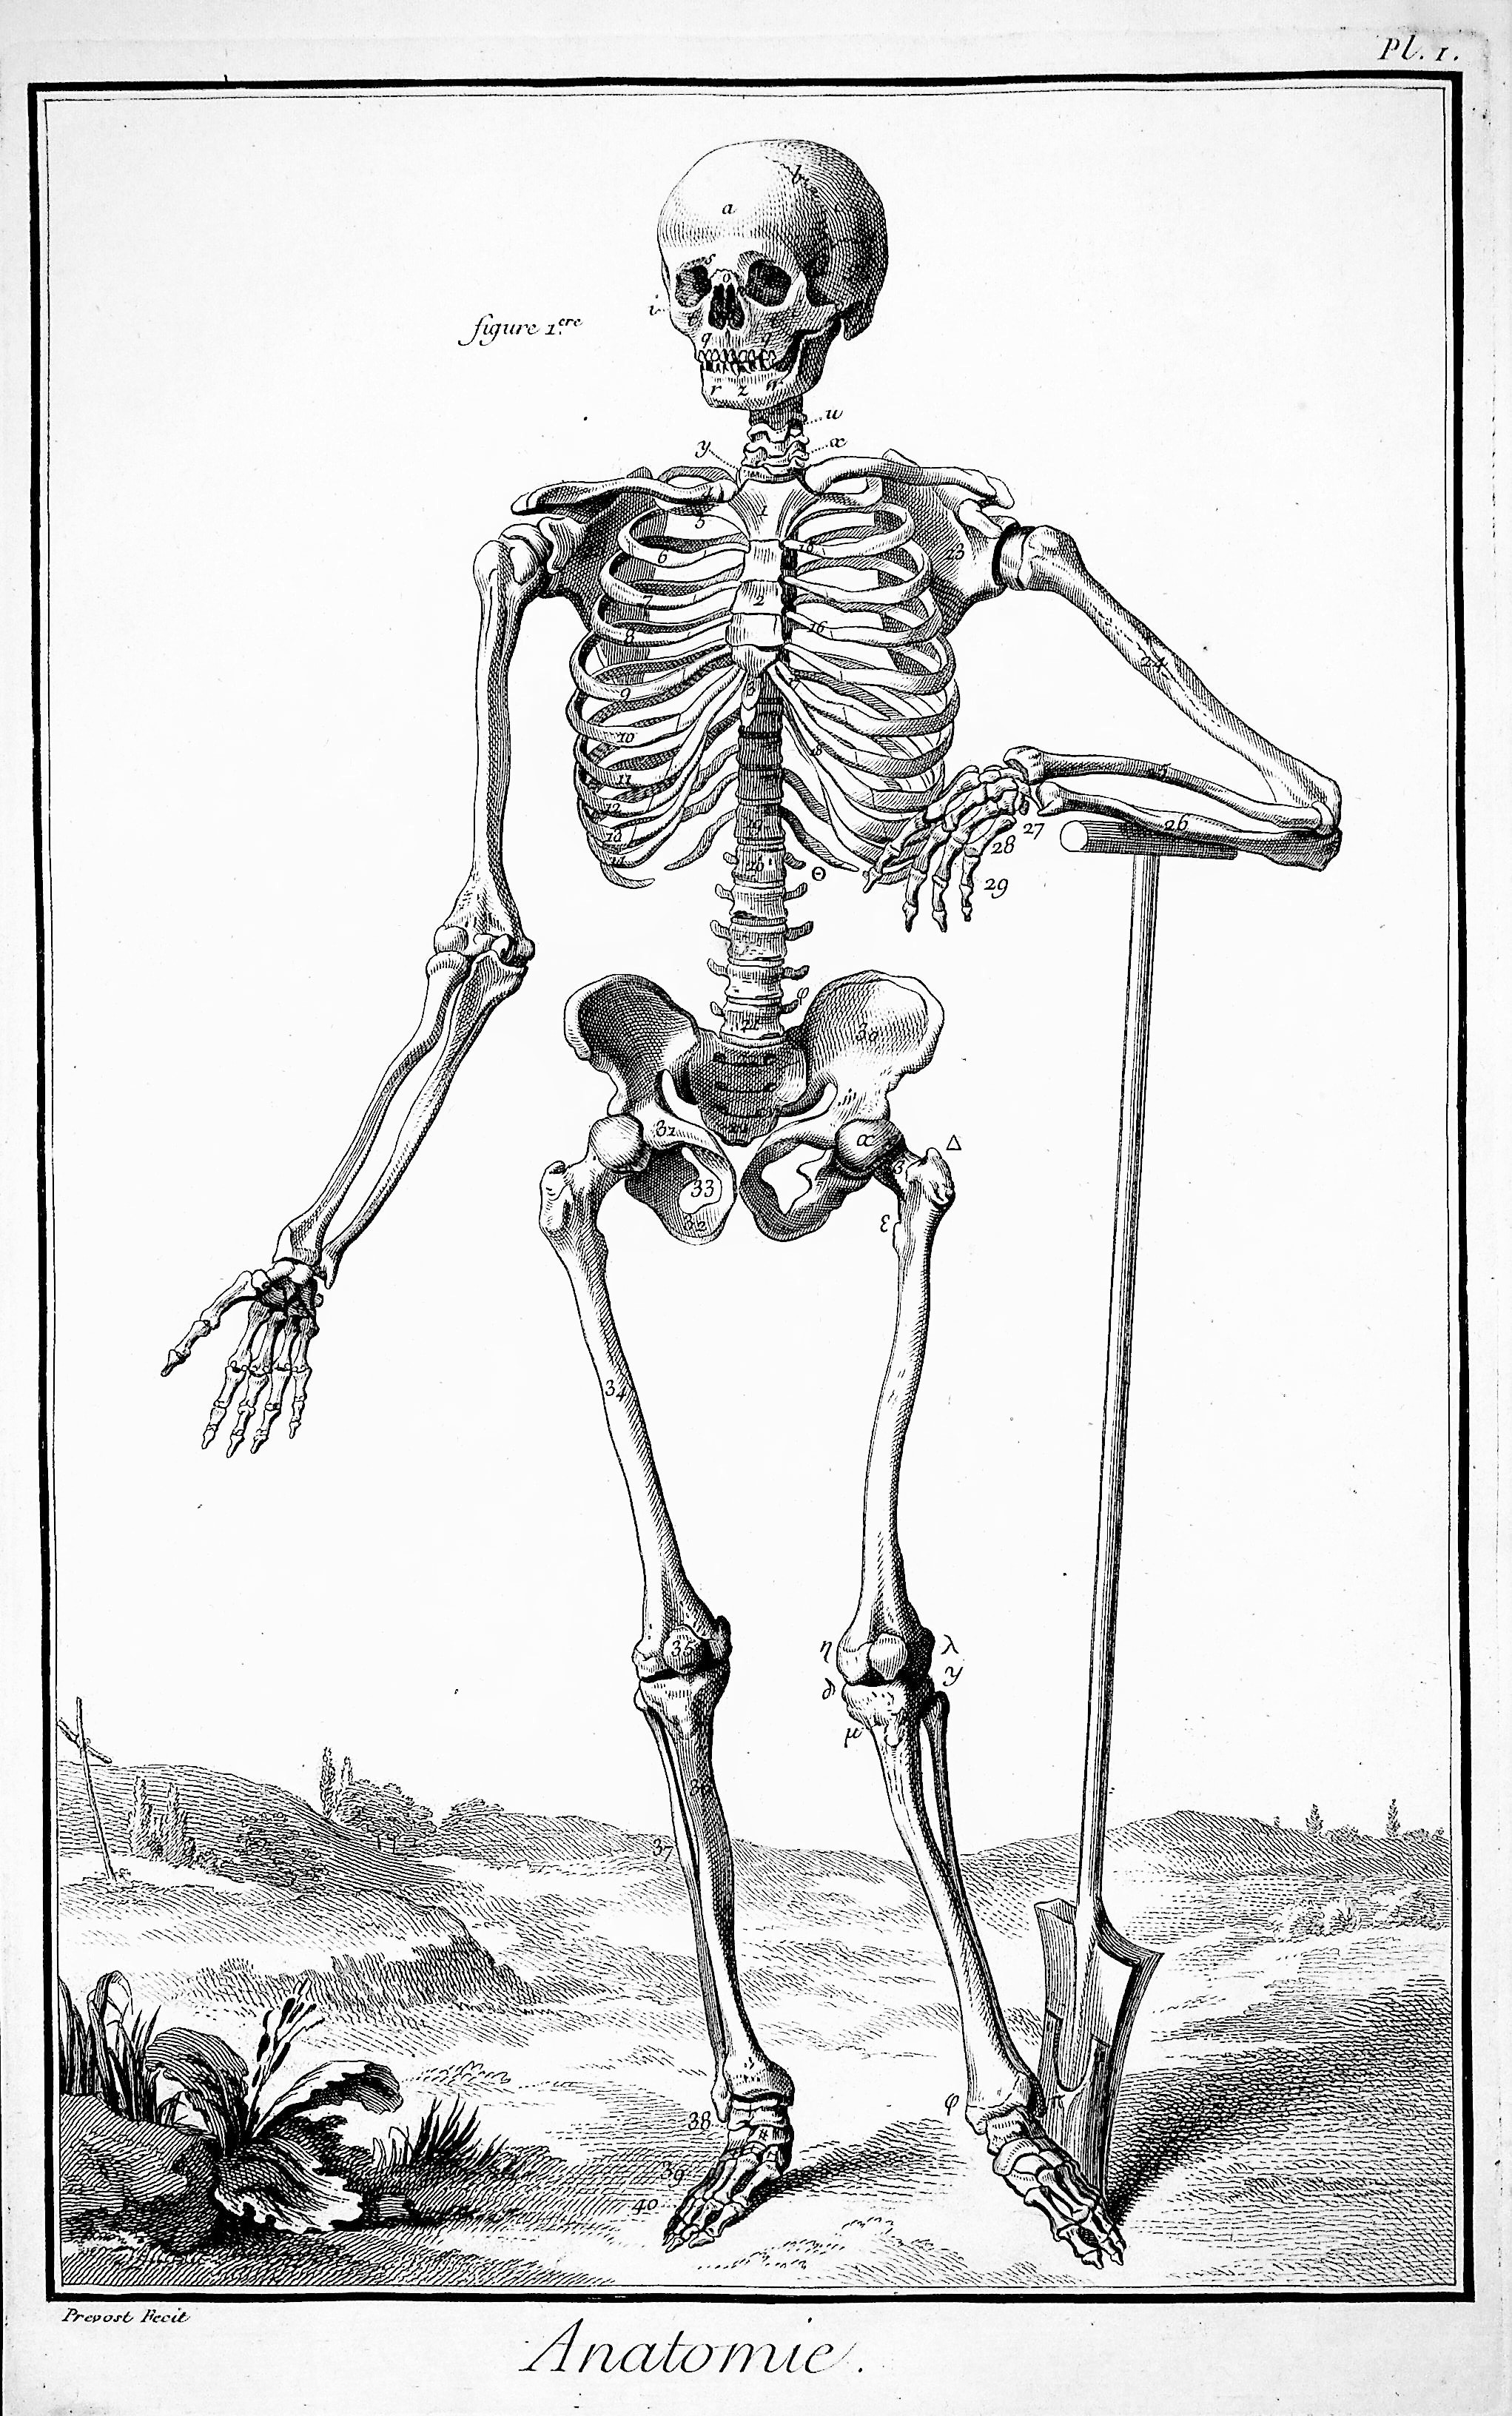 Image for Encyclopedie, Anatomie Plate I. The skeleton seen from the front, after Vesalius